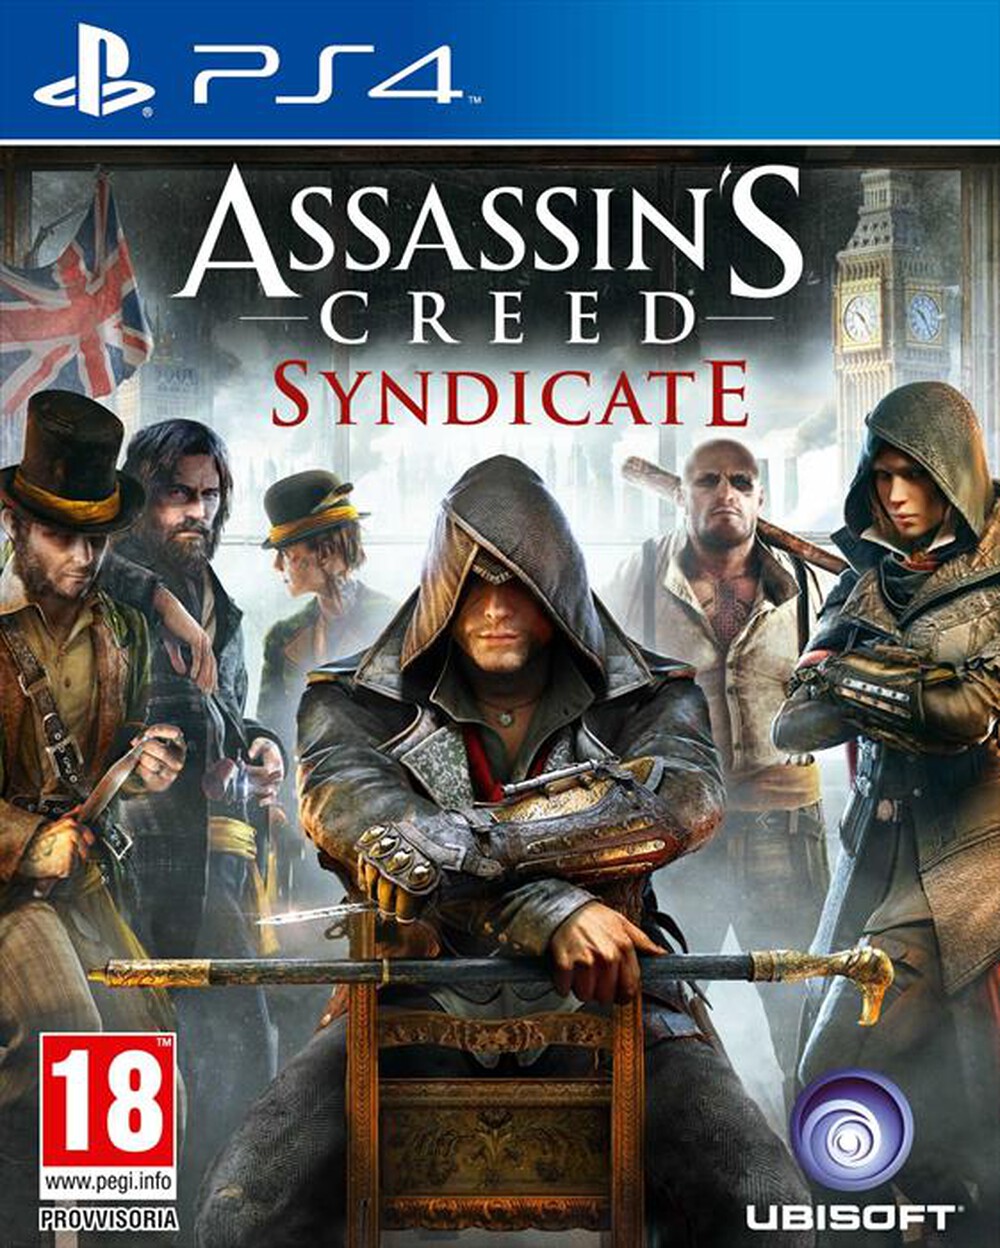 "UBISOFT - Assassin’s Creed Syndicate Ps4"